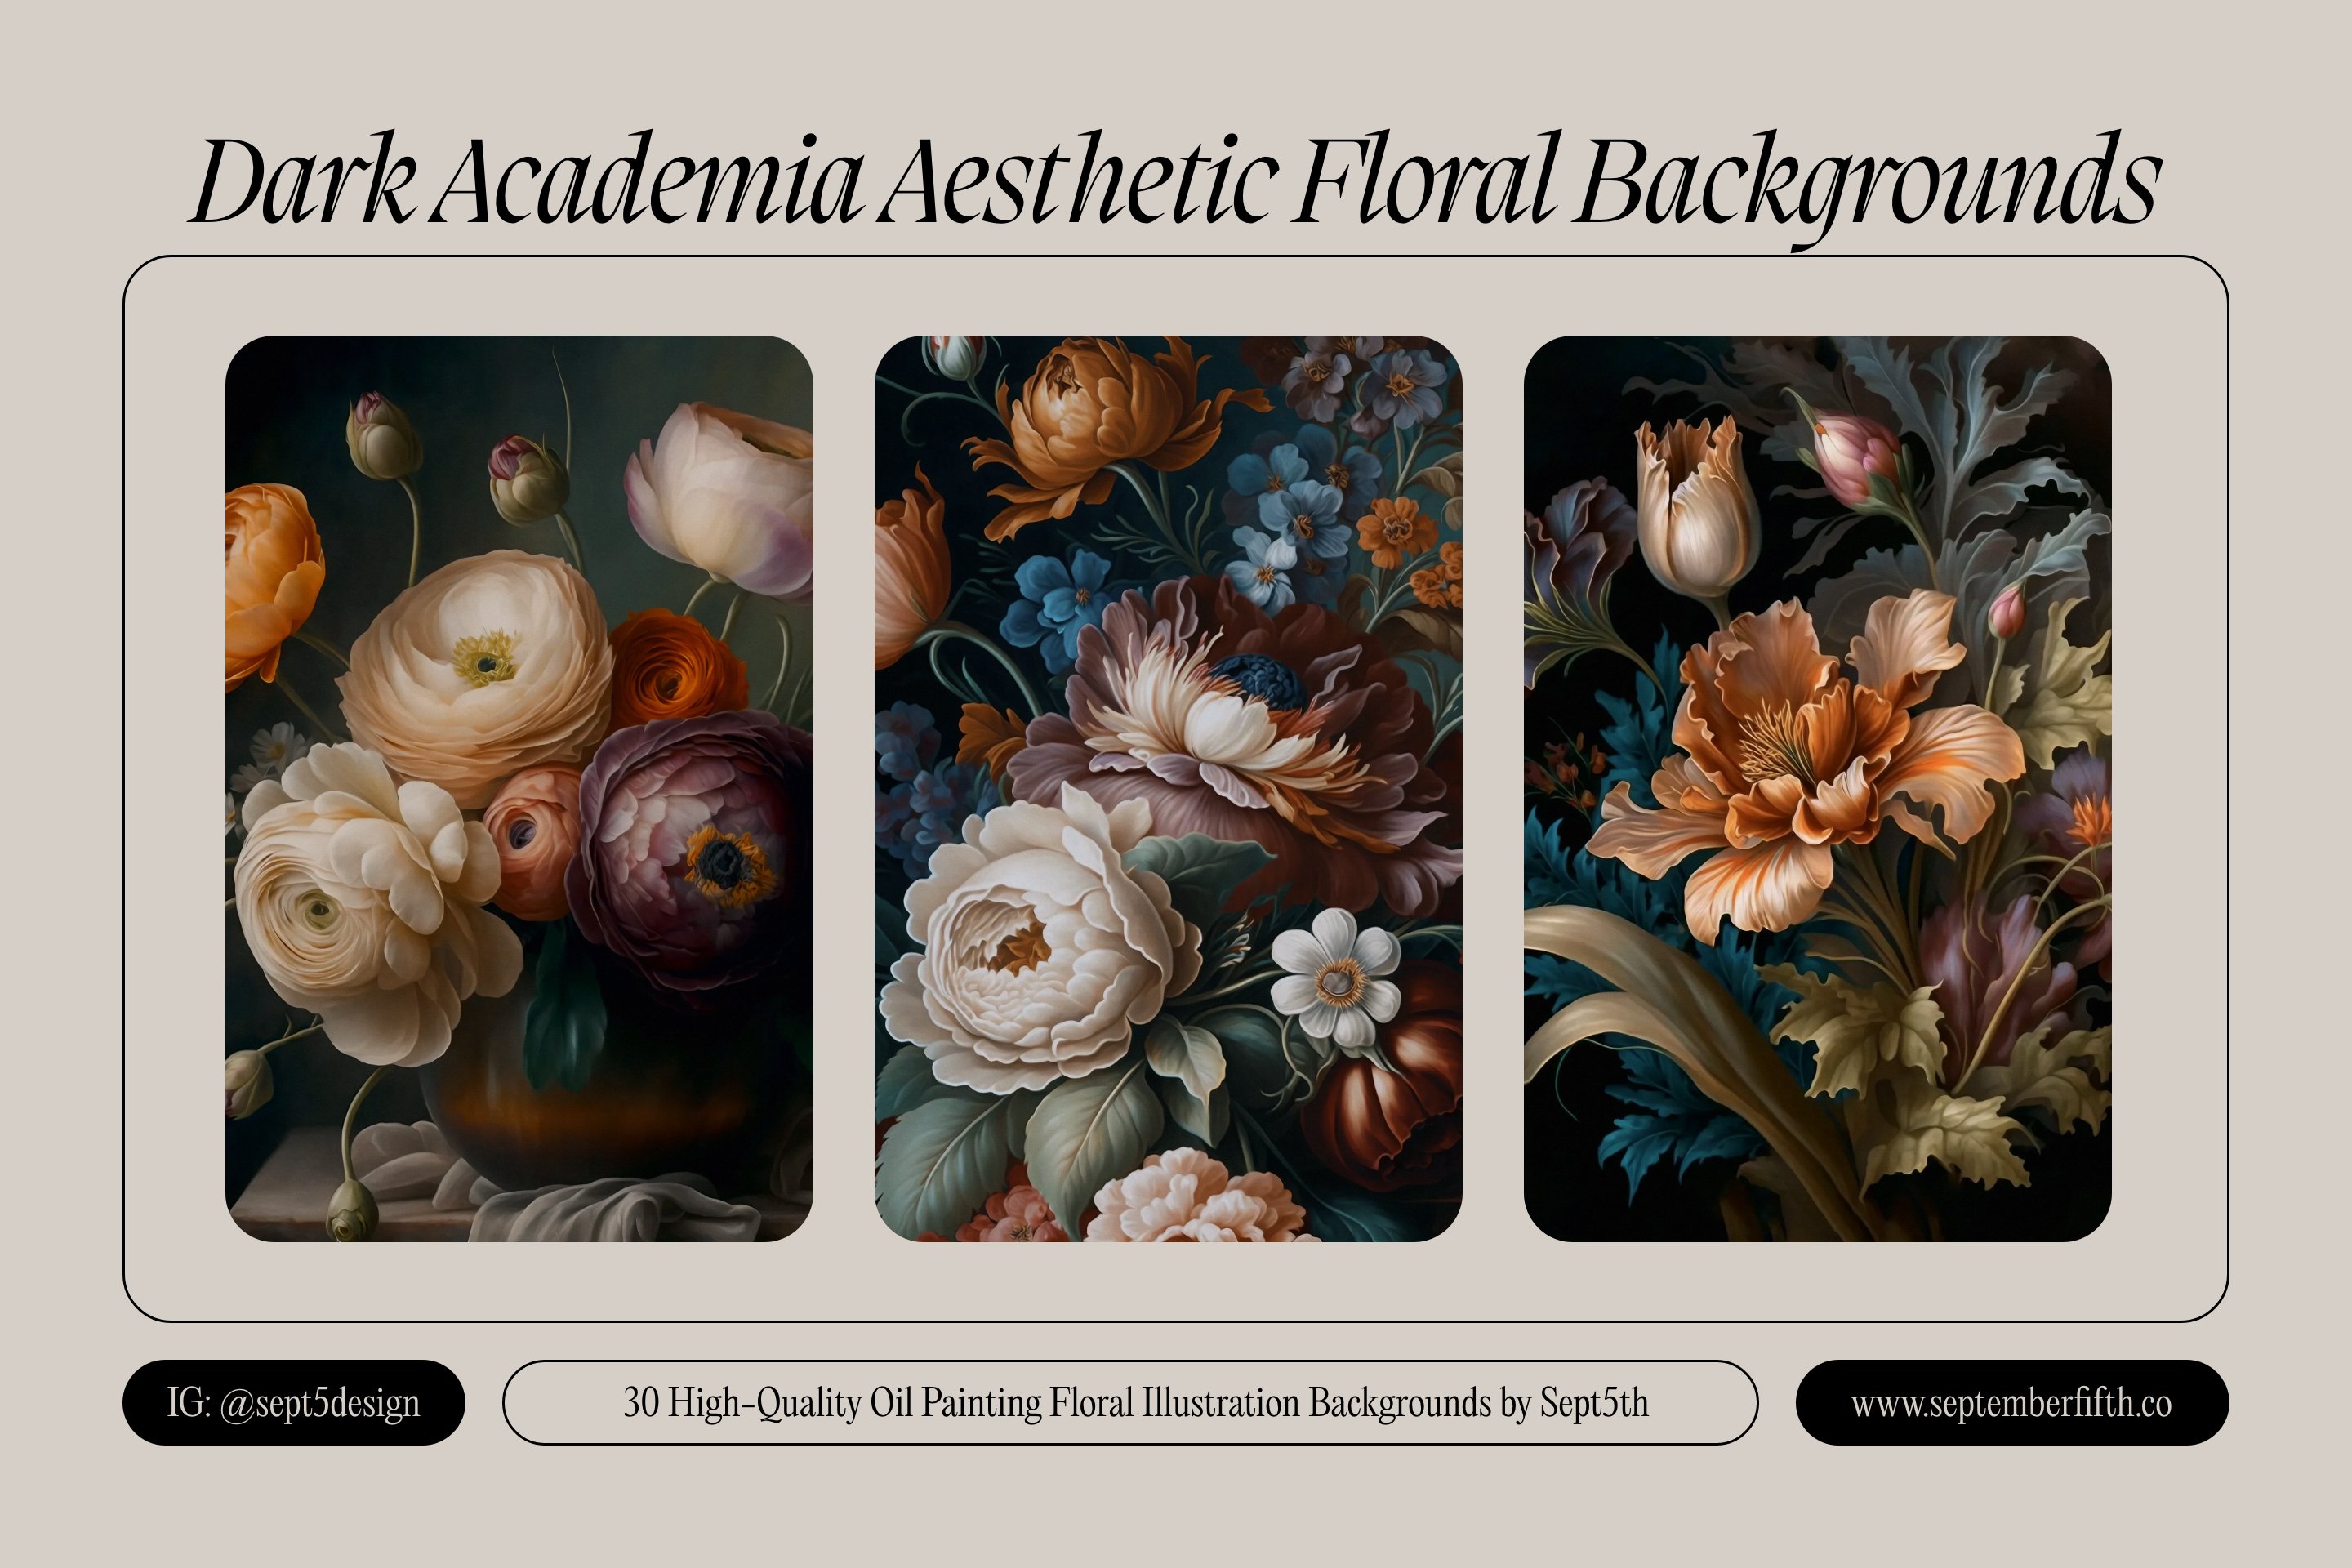 Nice floral backgrounds collection which looks like an art.